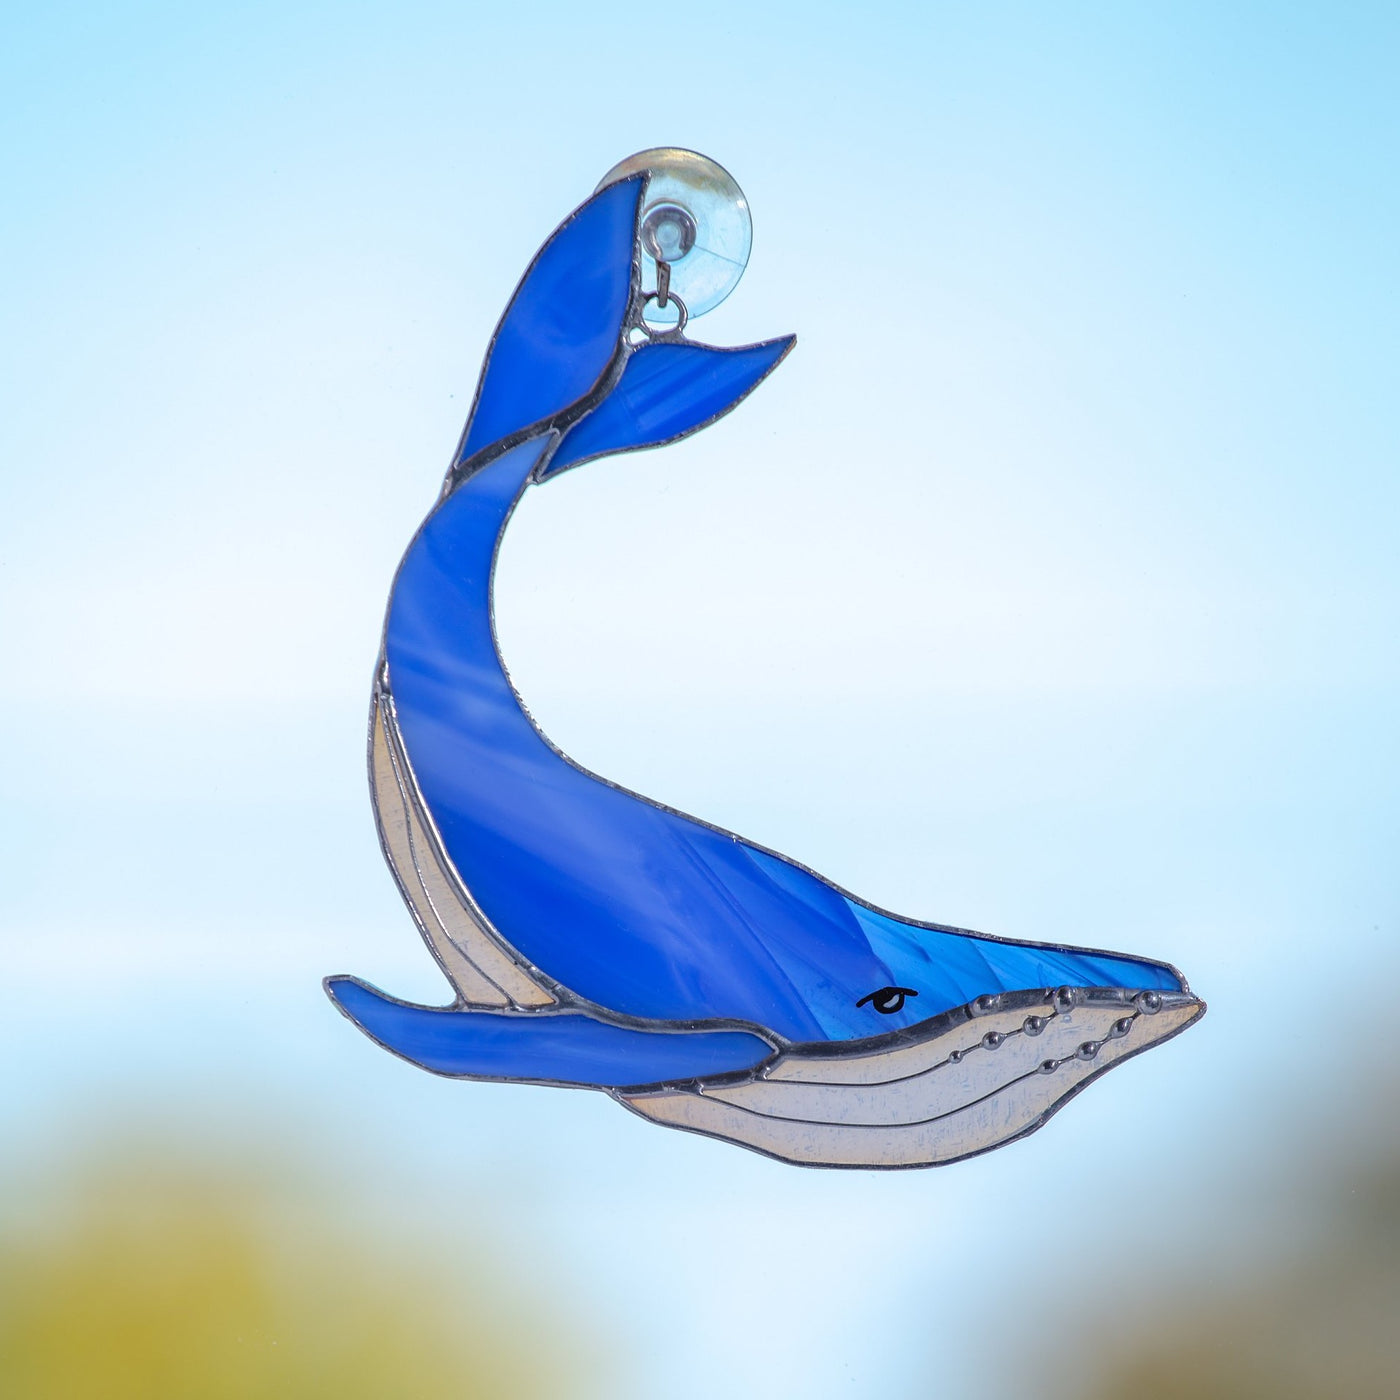 Suncatcher of a stained glass royal blue whale with its tail up